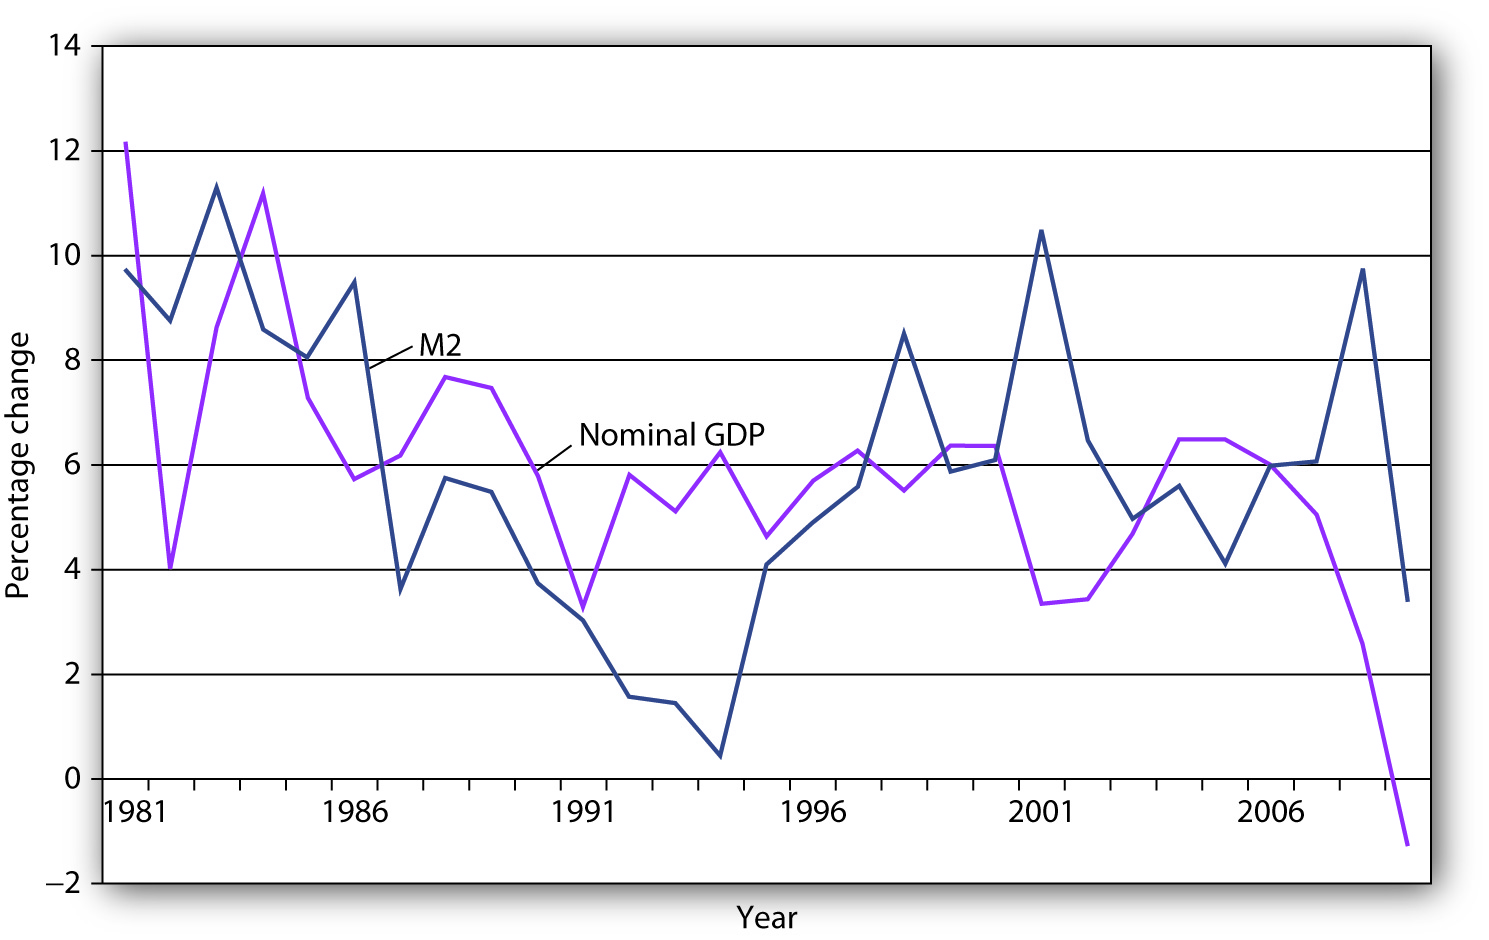 M2 and Nominal GDP. The close relationship between M2 and nominal GDP a year later that had prevailed in the 1960s and 1970s seemed to vanish from the 1980s onward.